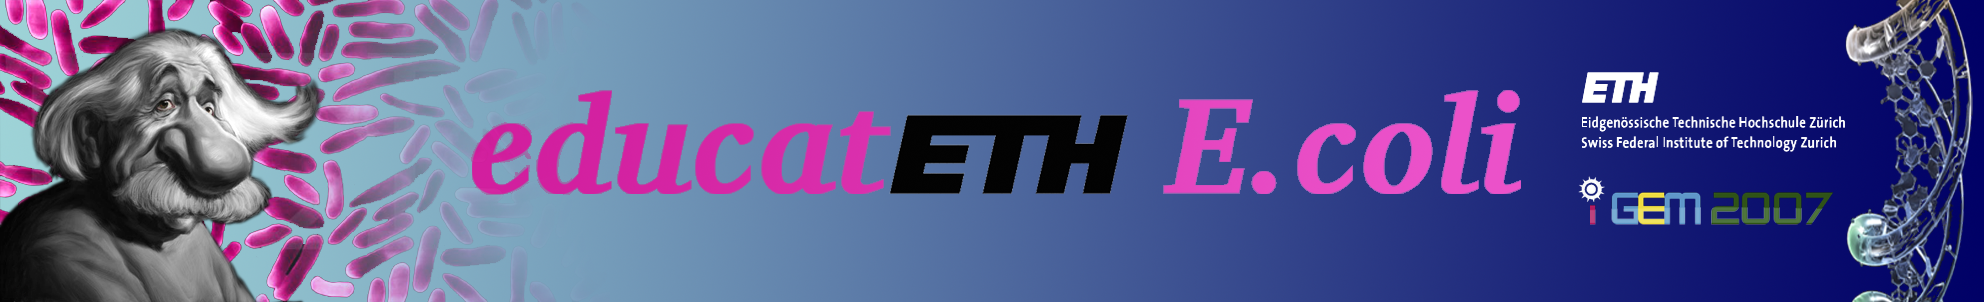 ETH banner.png